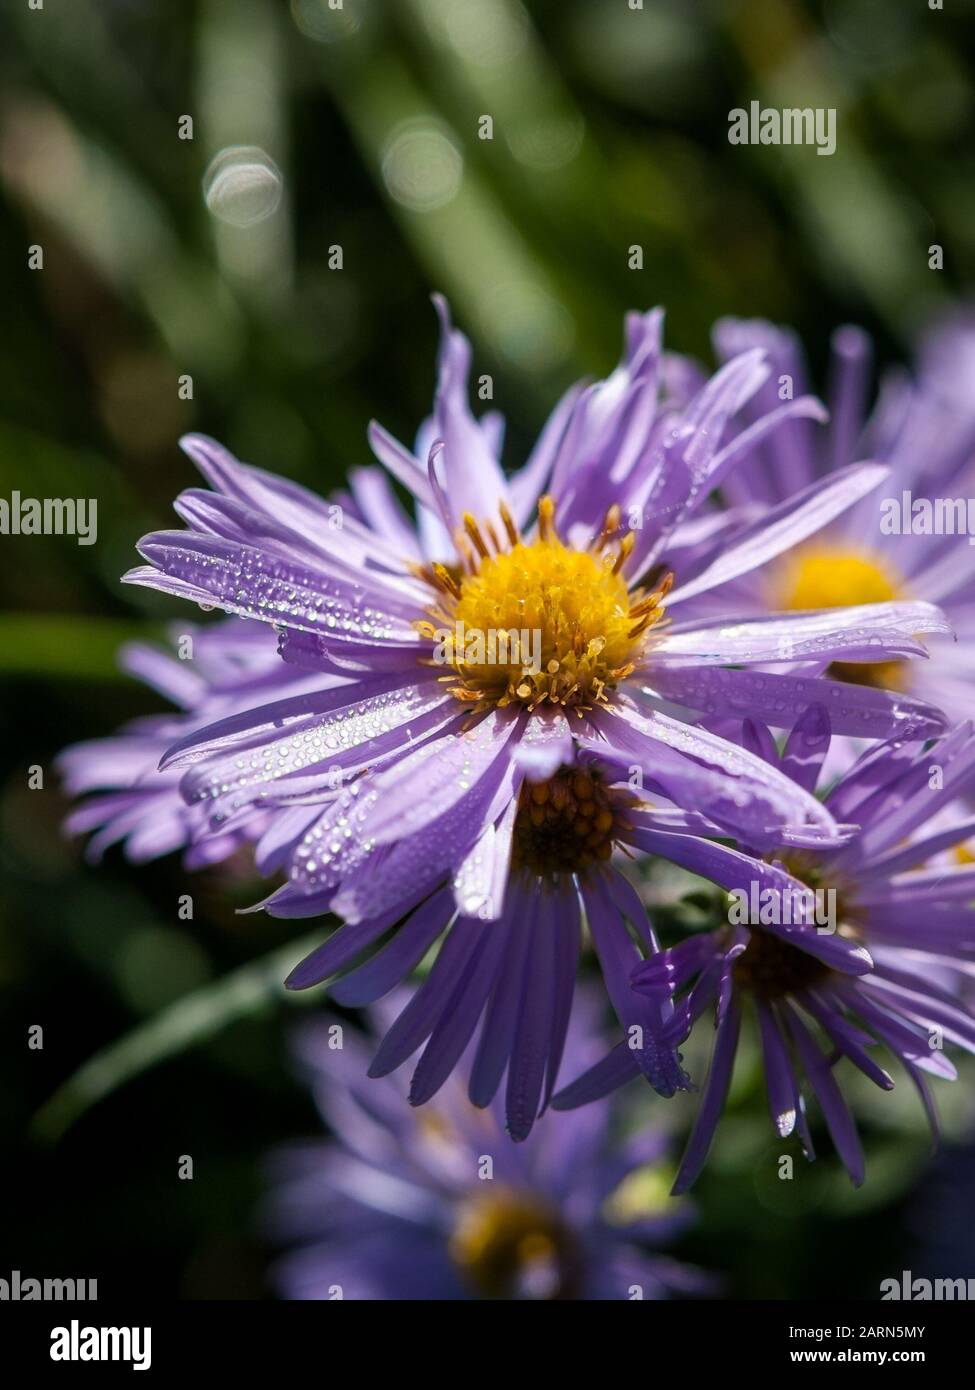 New York aster flower, Symphyotrichum novi-belgii, close-up, in a meadow Stock Photo